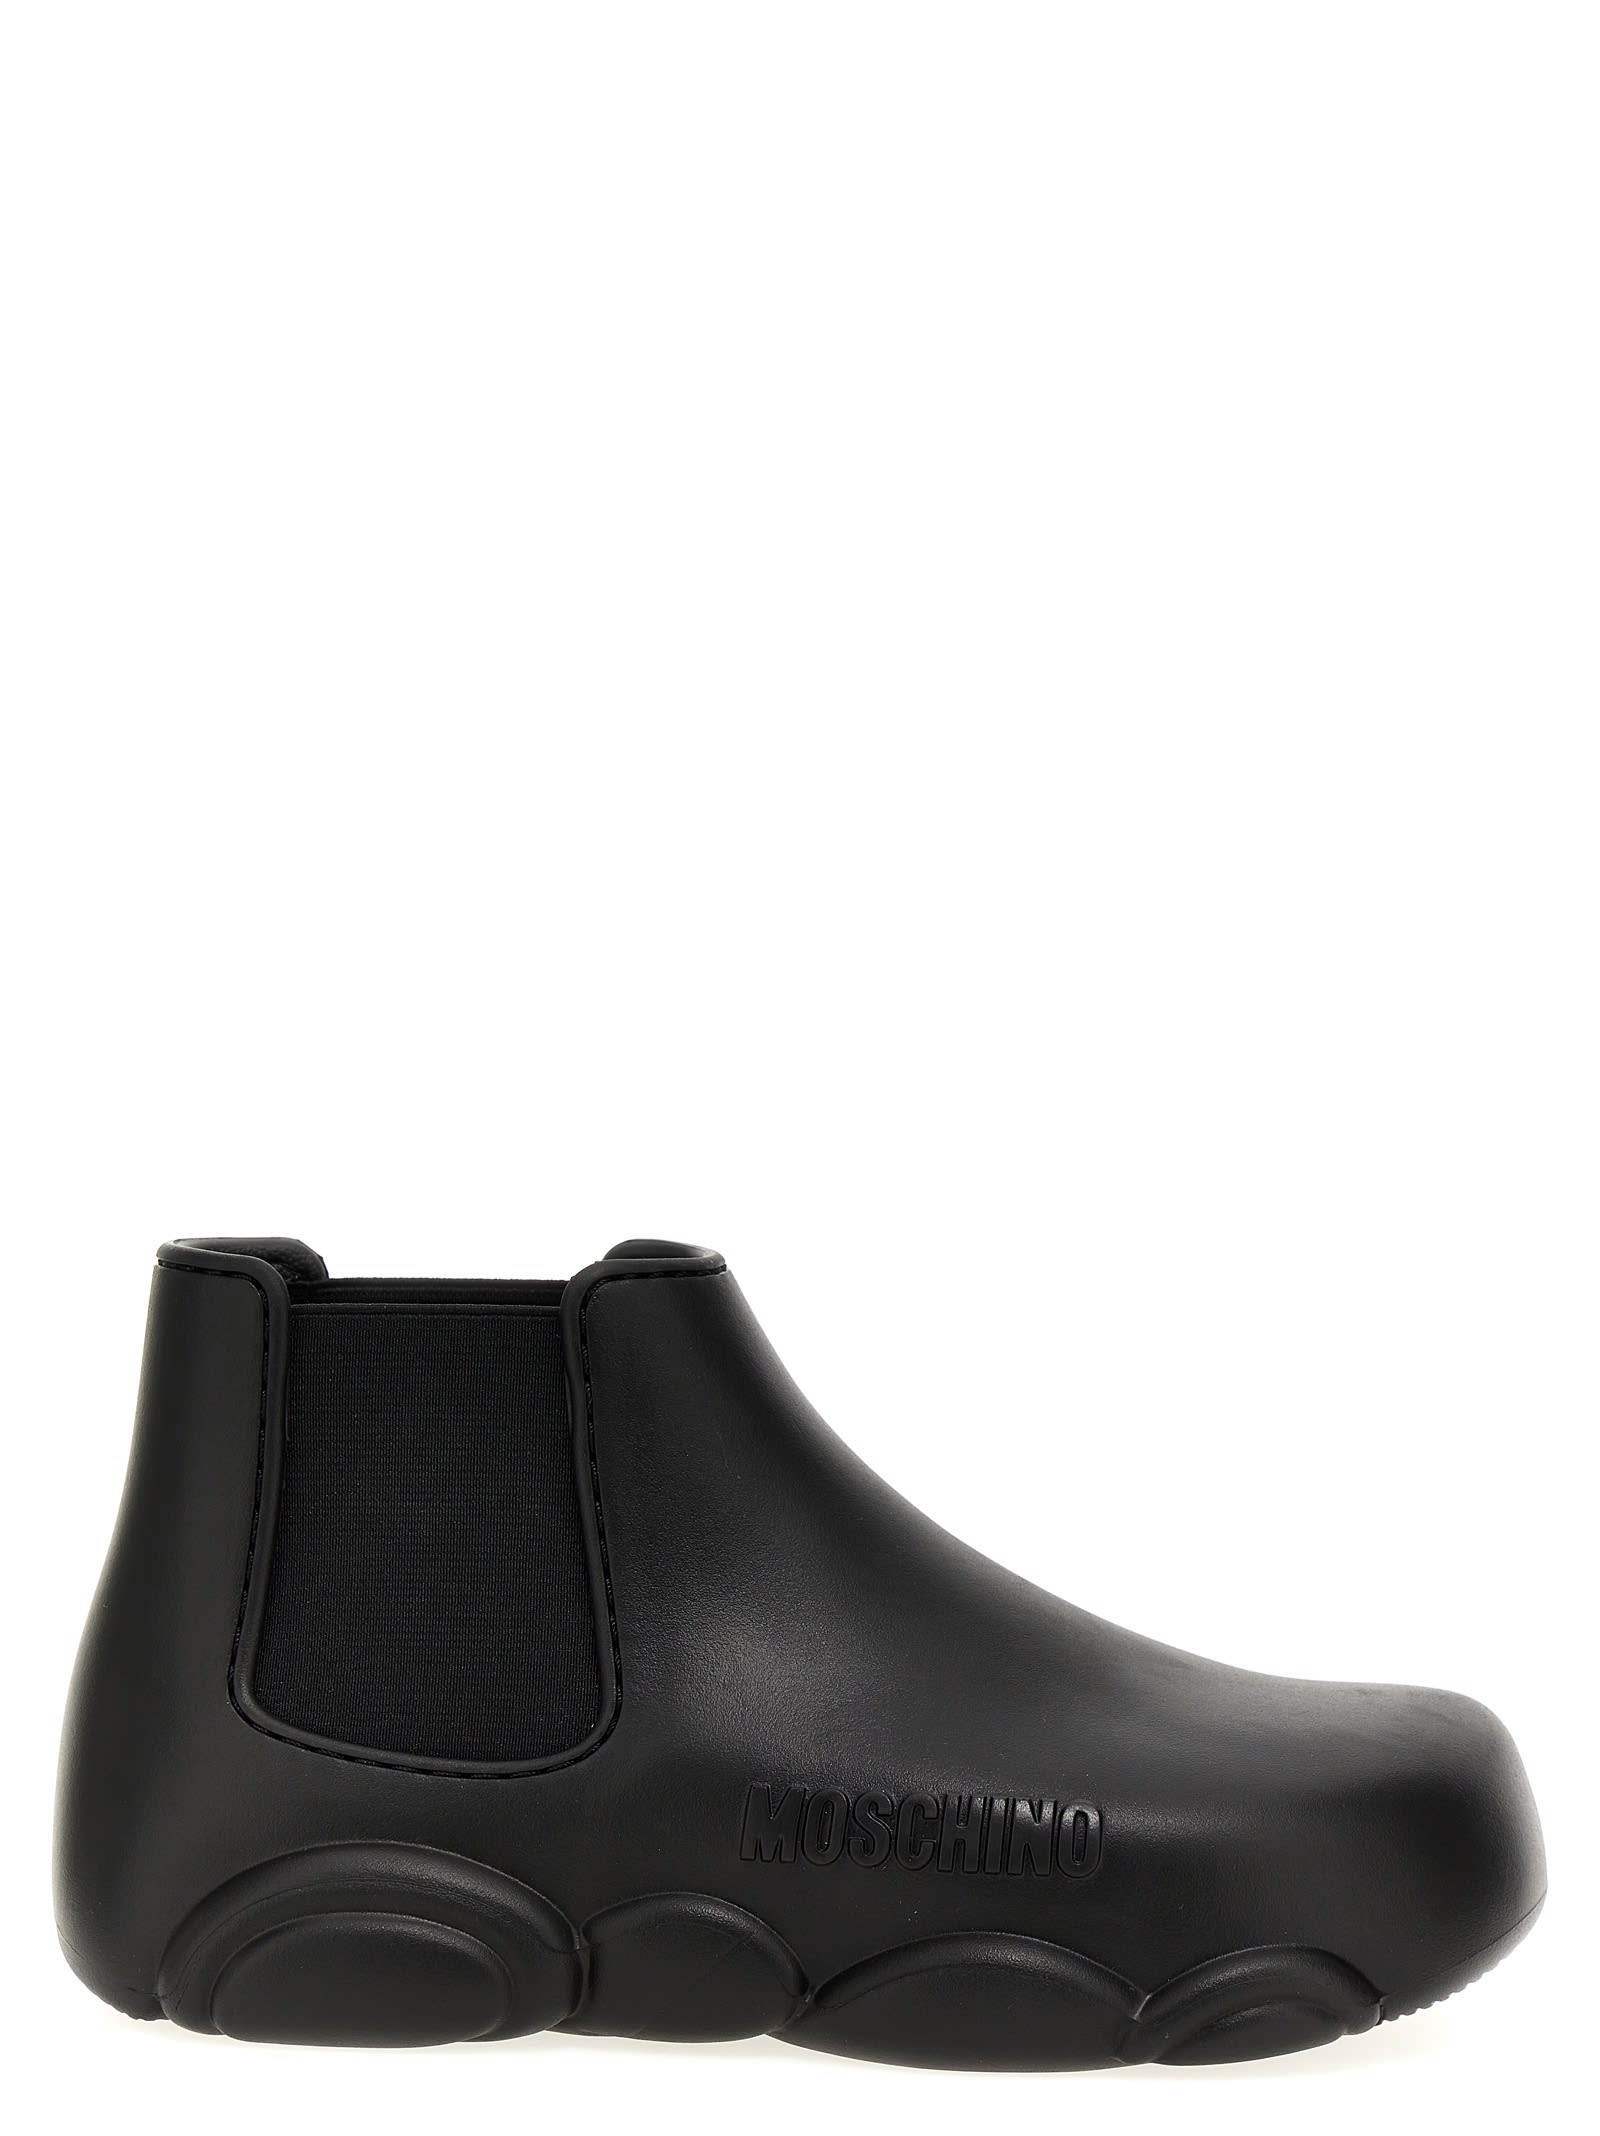 Moschino gummy Ankle Boots